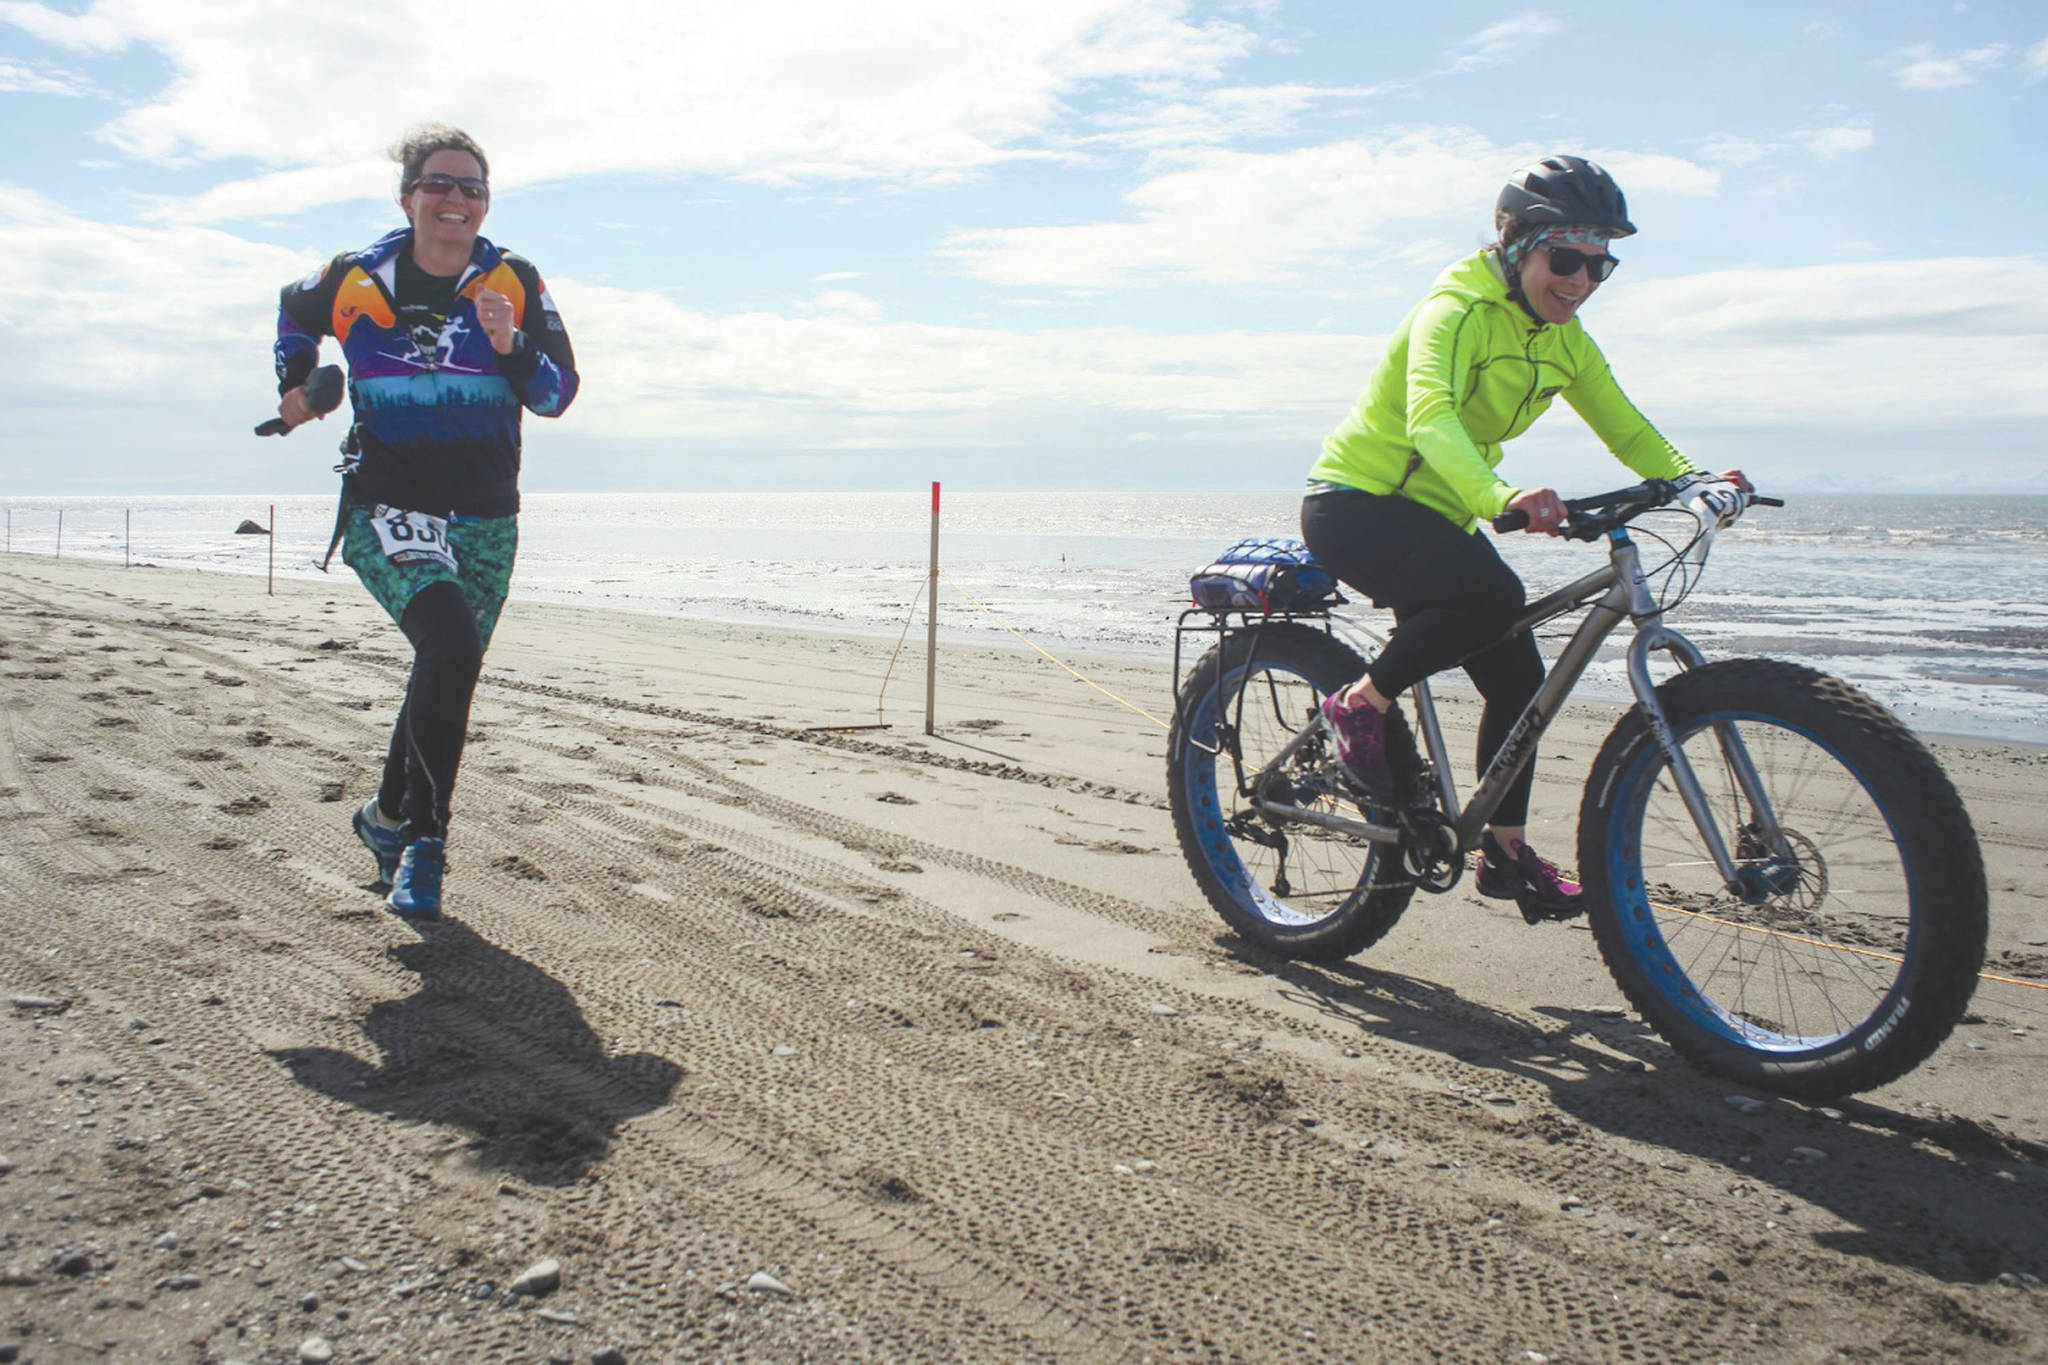 Photo courtesy Kaitlin Vadla                                Heather Renner and Tasha Reynolds run and fat bike to the finish line on the Kenai Beach during the 2019 Mouth to Mouth Wild Run & Ride.